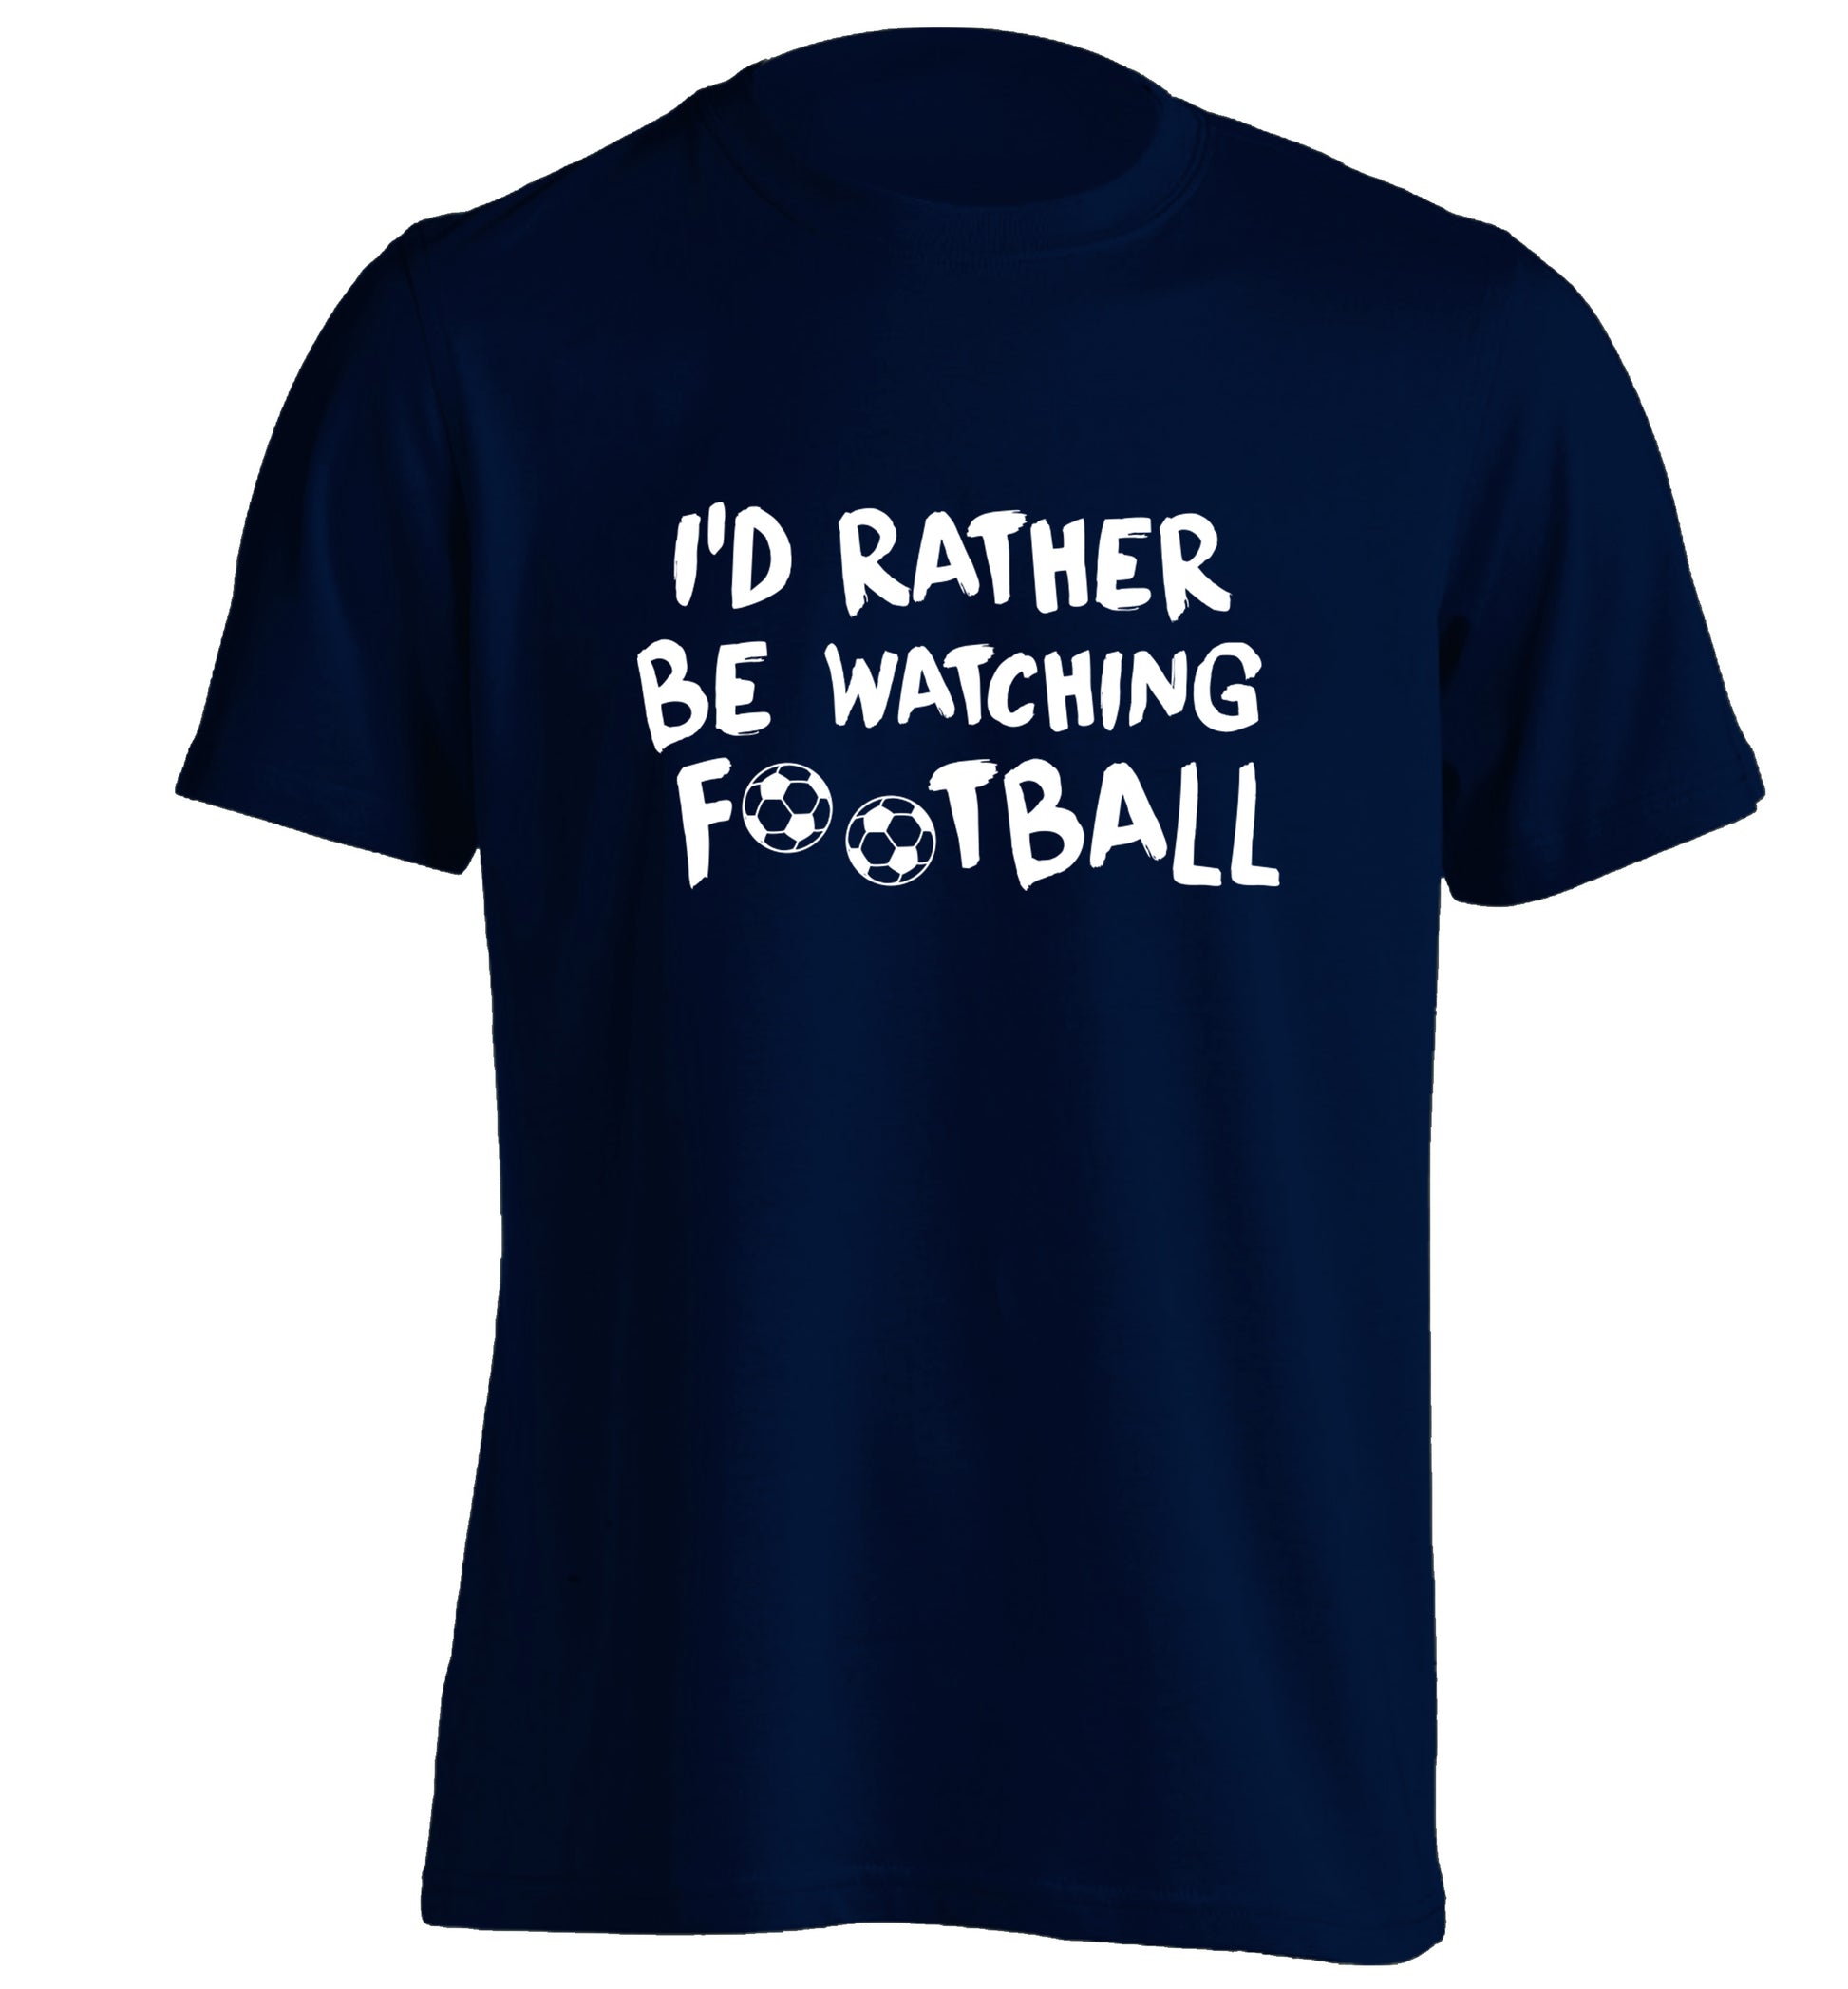 I'd rather be watching football adults unisexnavy Tshirt 2XL